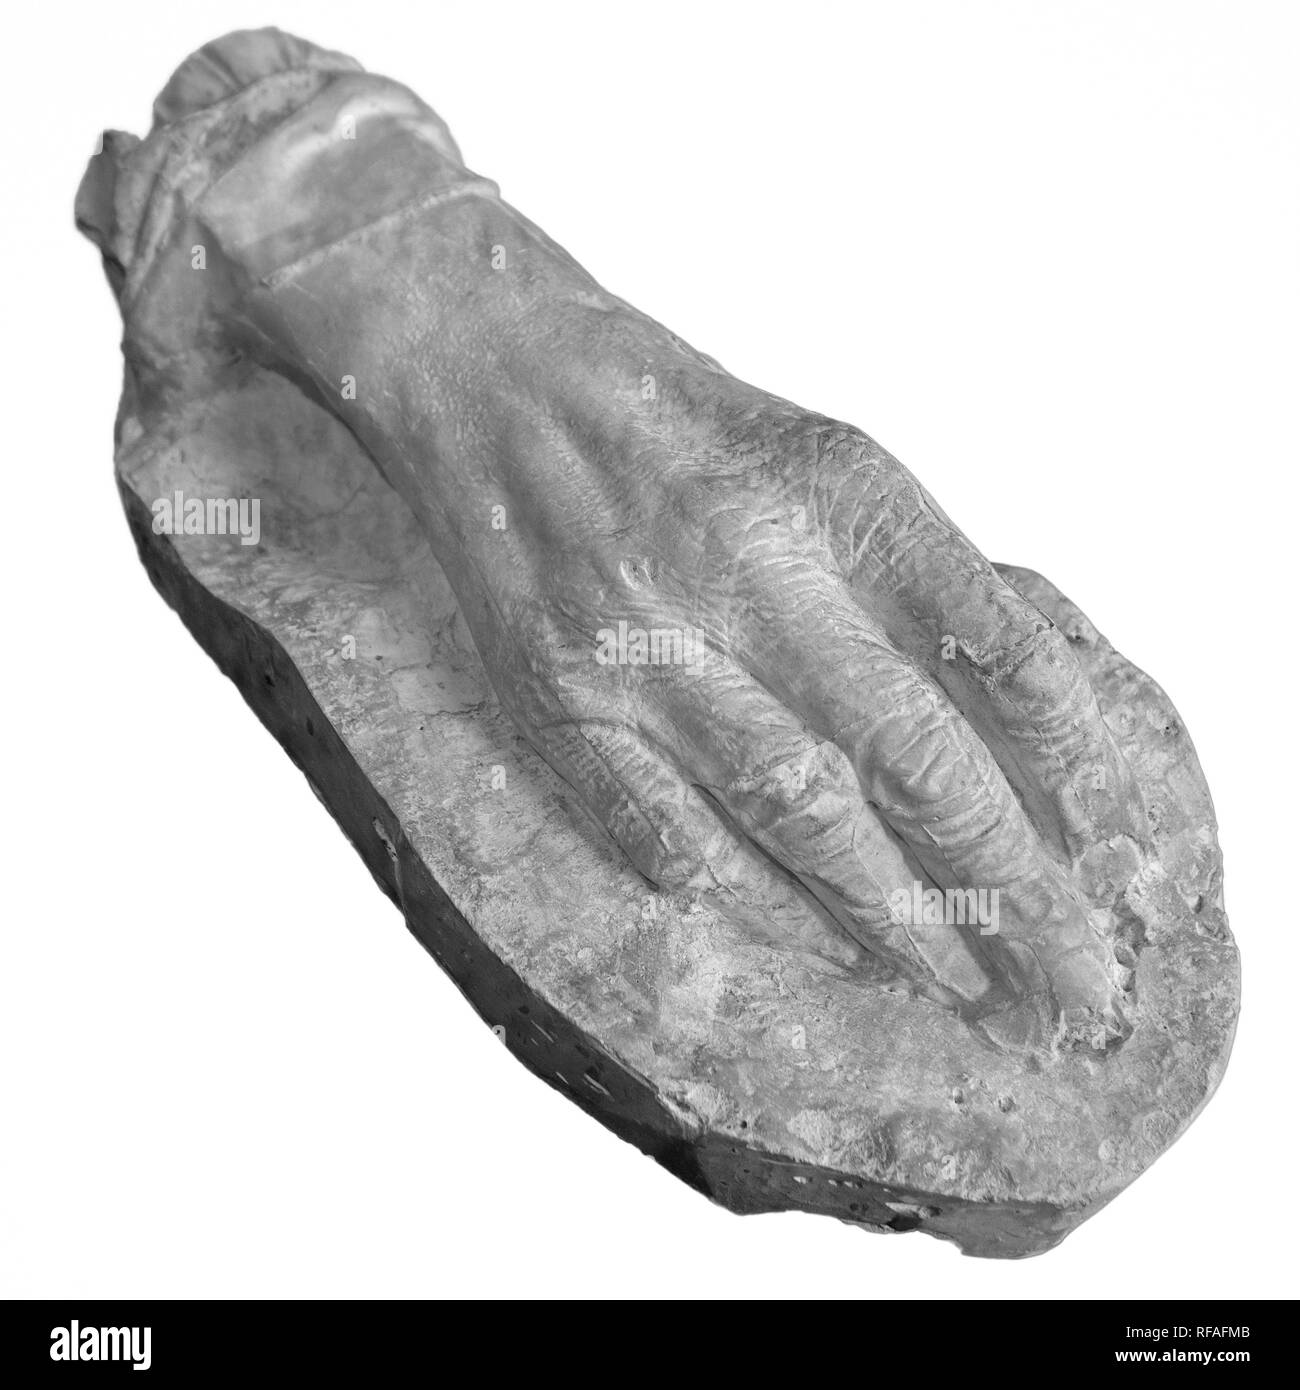 Plaster cast of the hand of the Flemish poet Guido Gezelle in the Gezellemuseum, birthplace in the city Bruges, West Flanders, Belgium Stock Photo